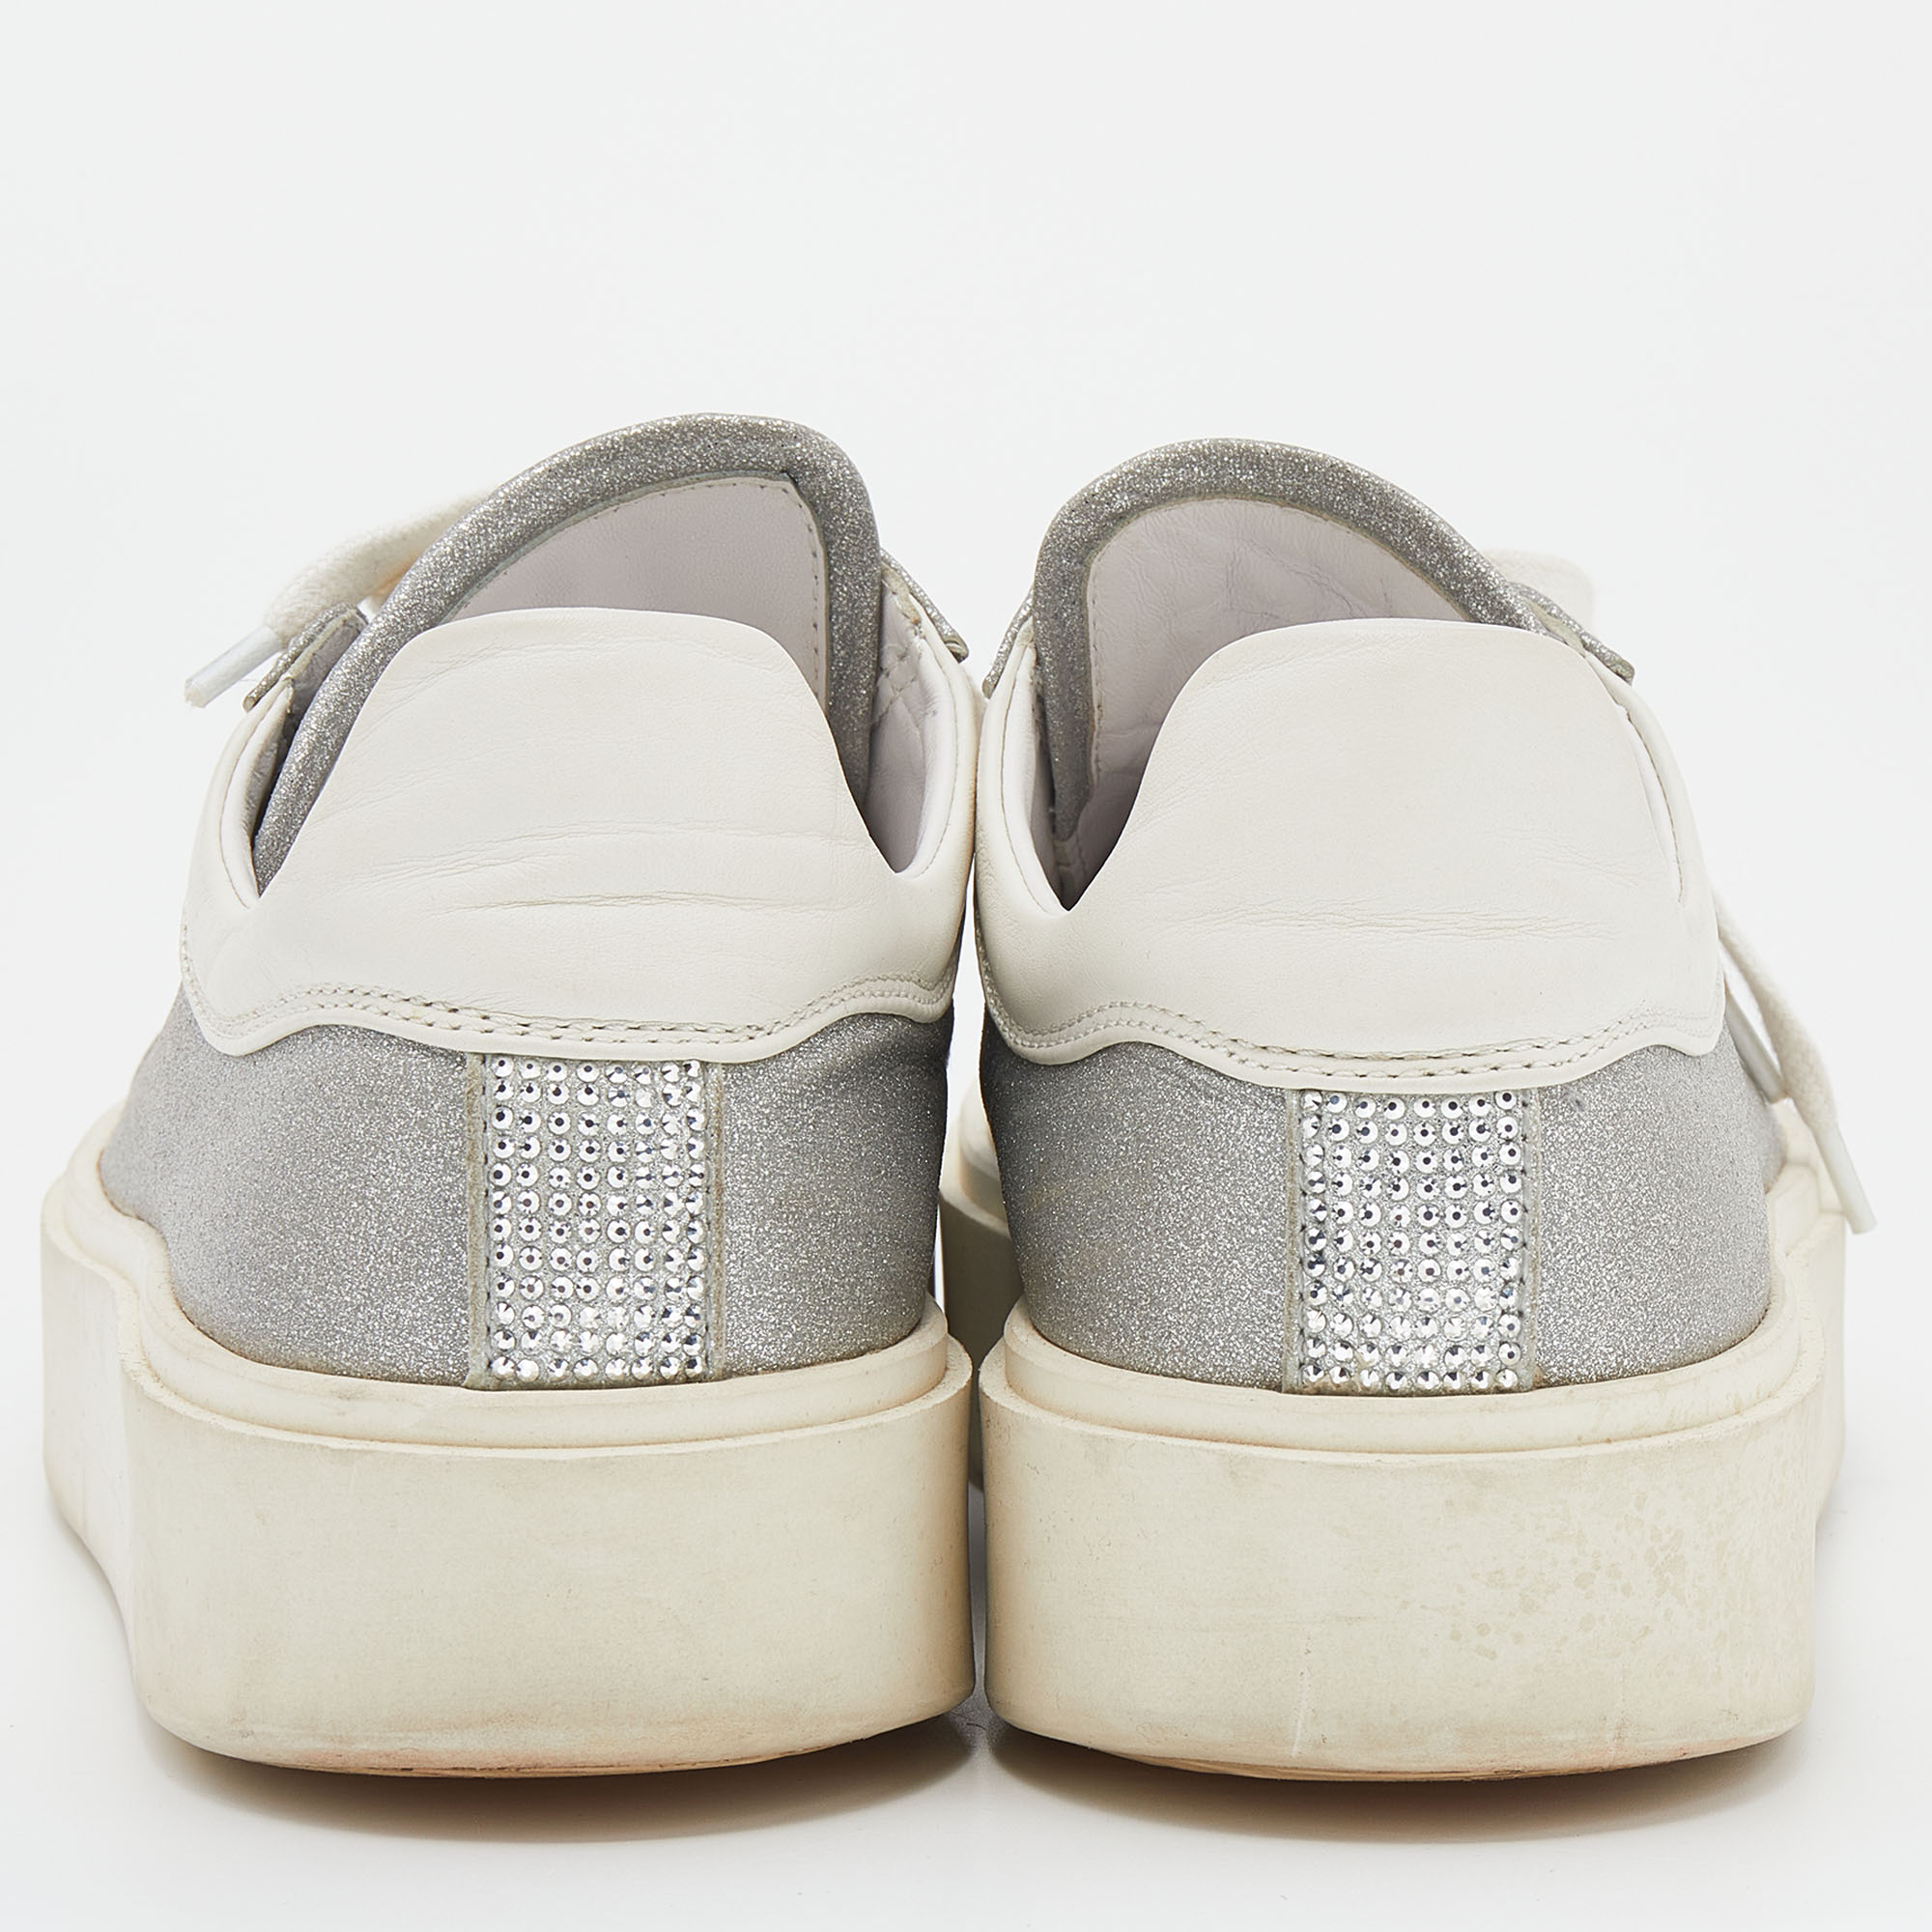 Le Silla Silver/White Glitter And Leather Sneakers Size 38